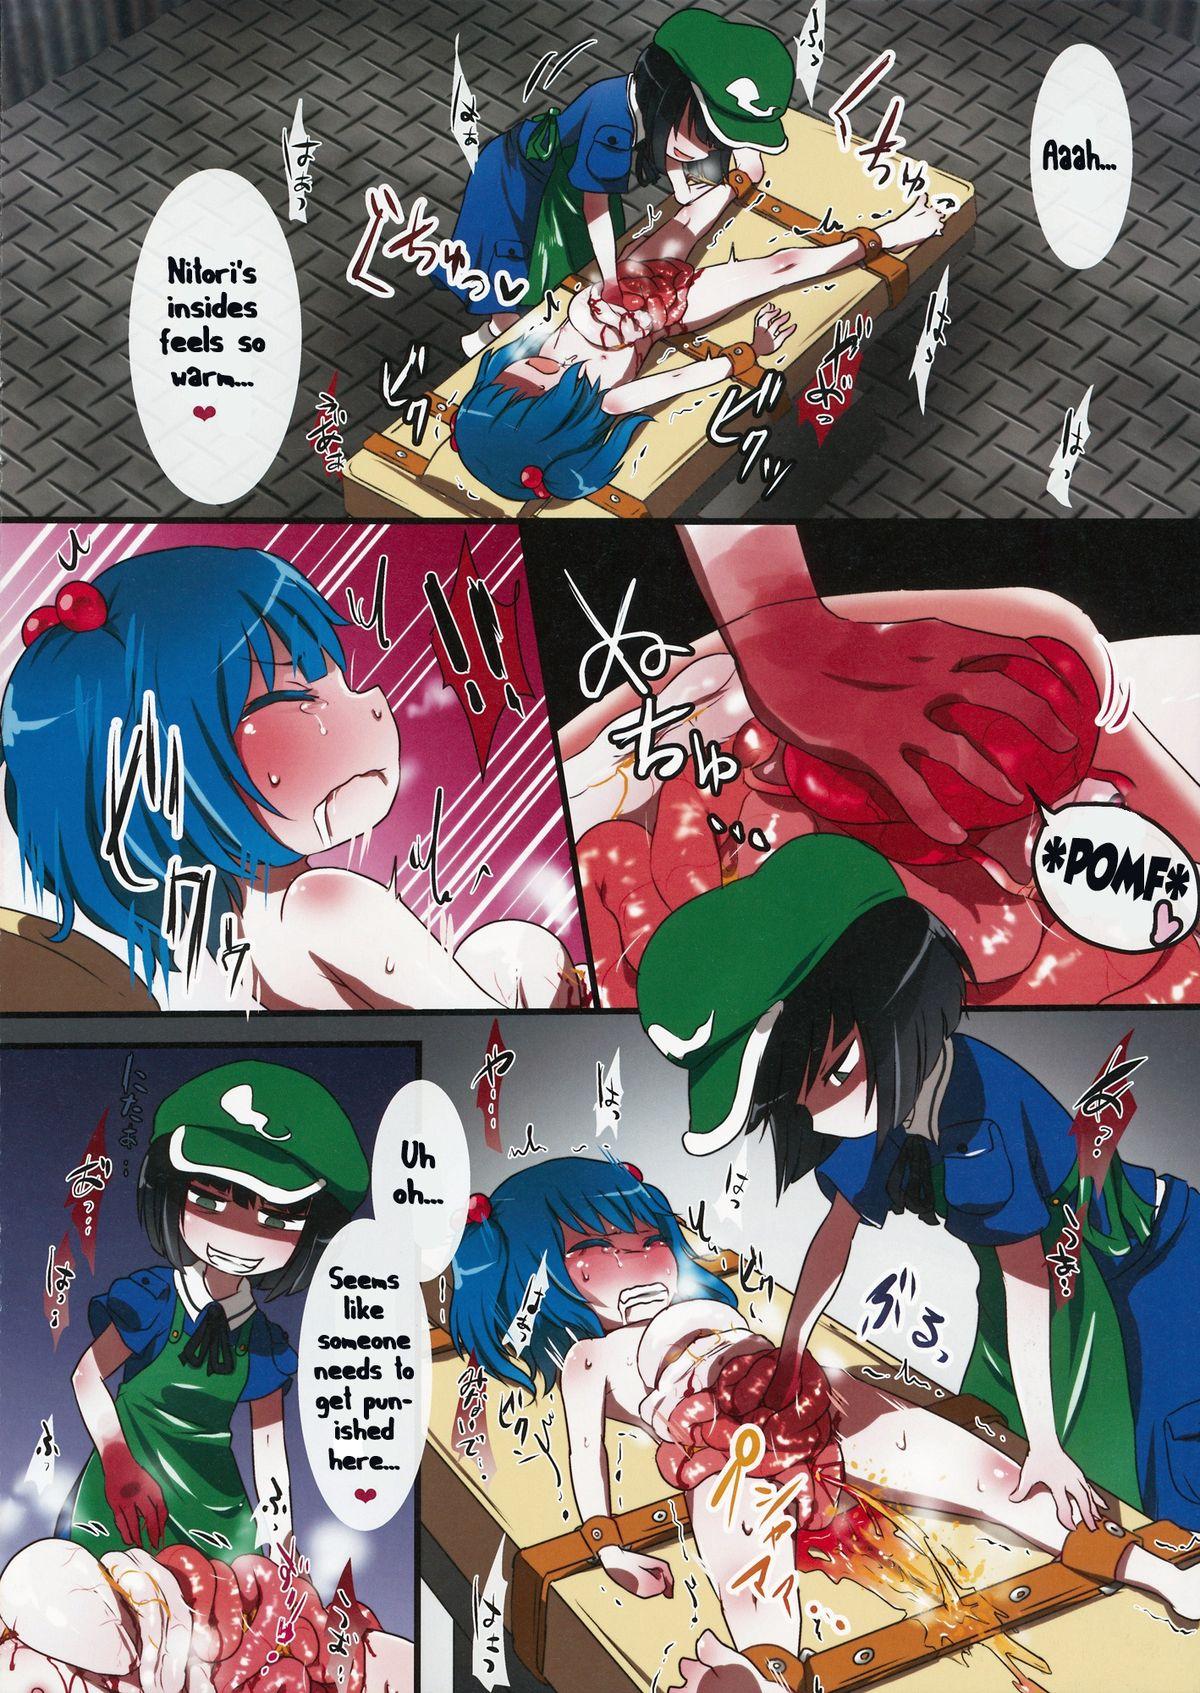 Ballbusting 0210564801 - Touhou project Beurette - Page 4